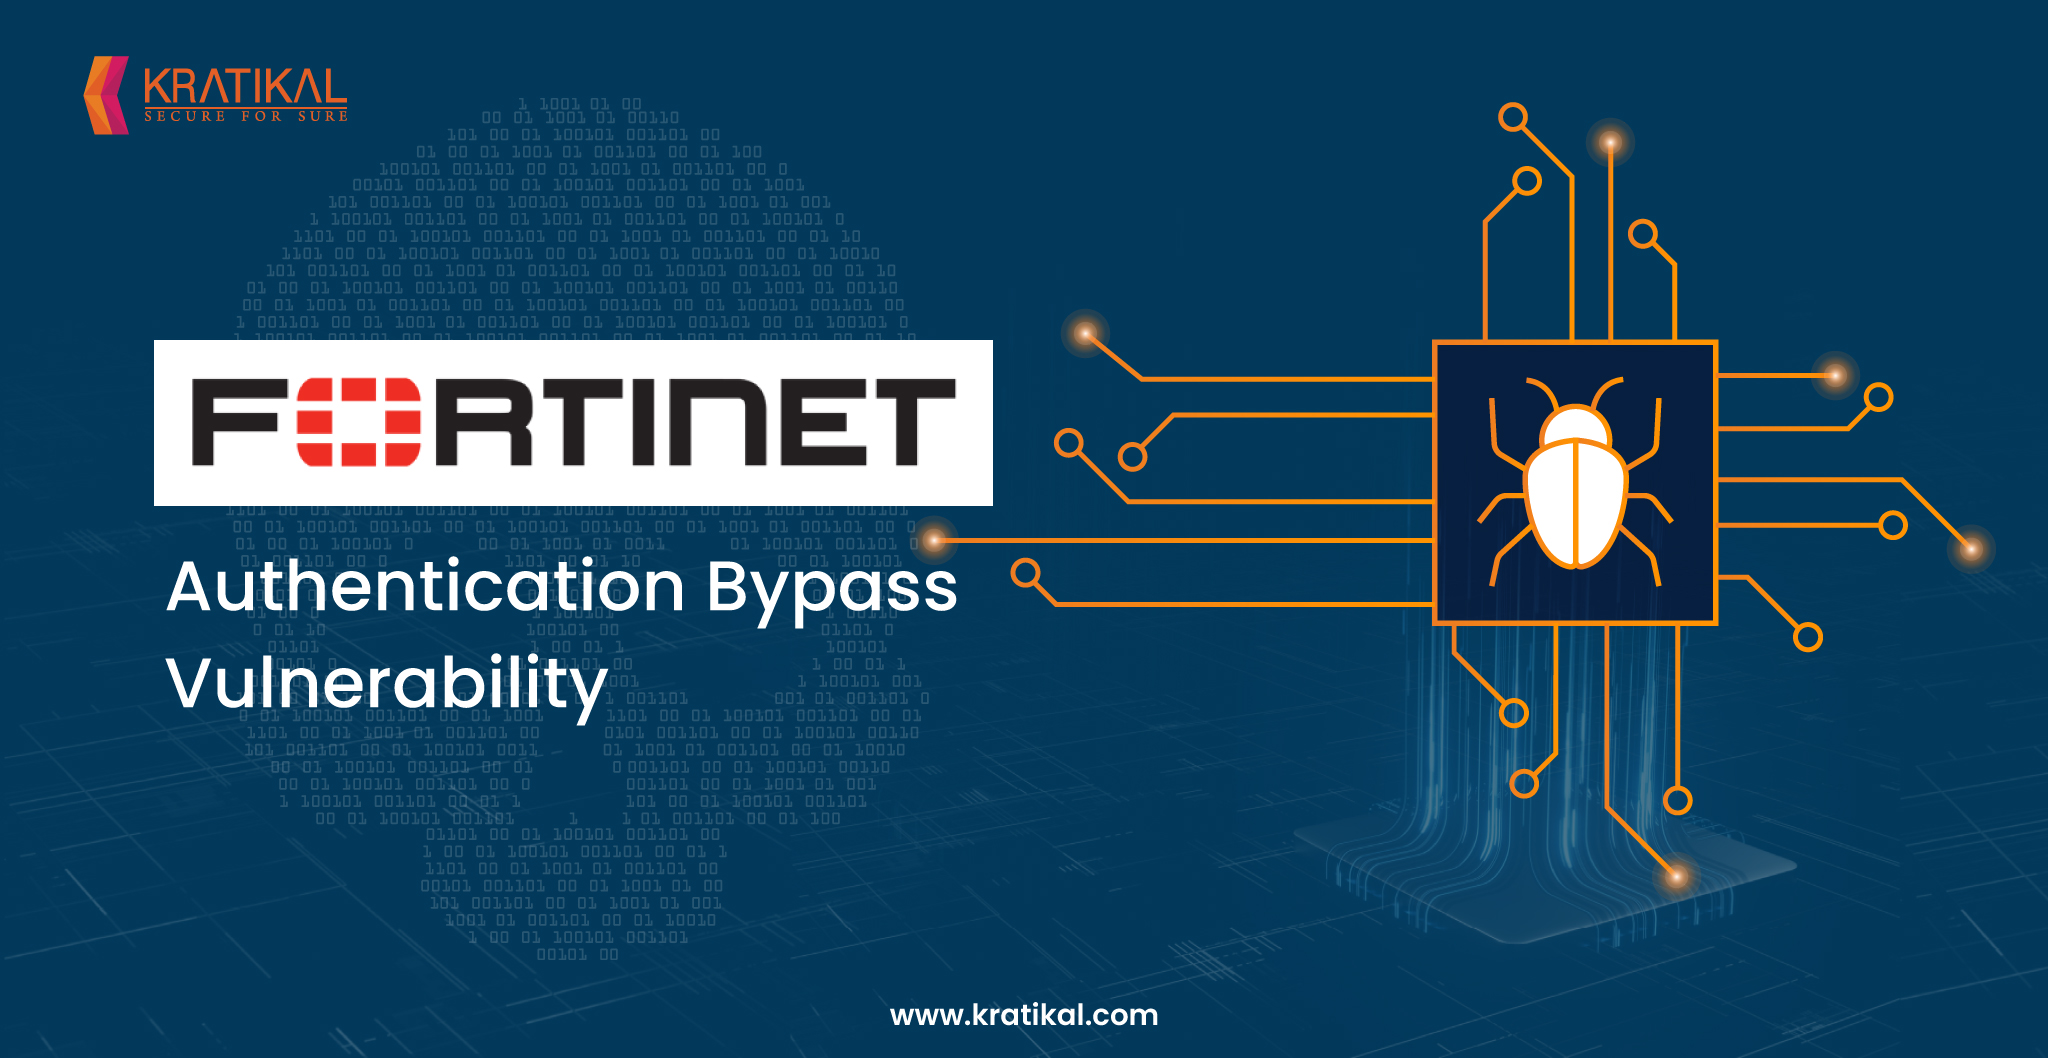 Fortinet Warns of New Authentication Bypass Vulnerability